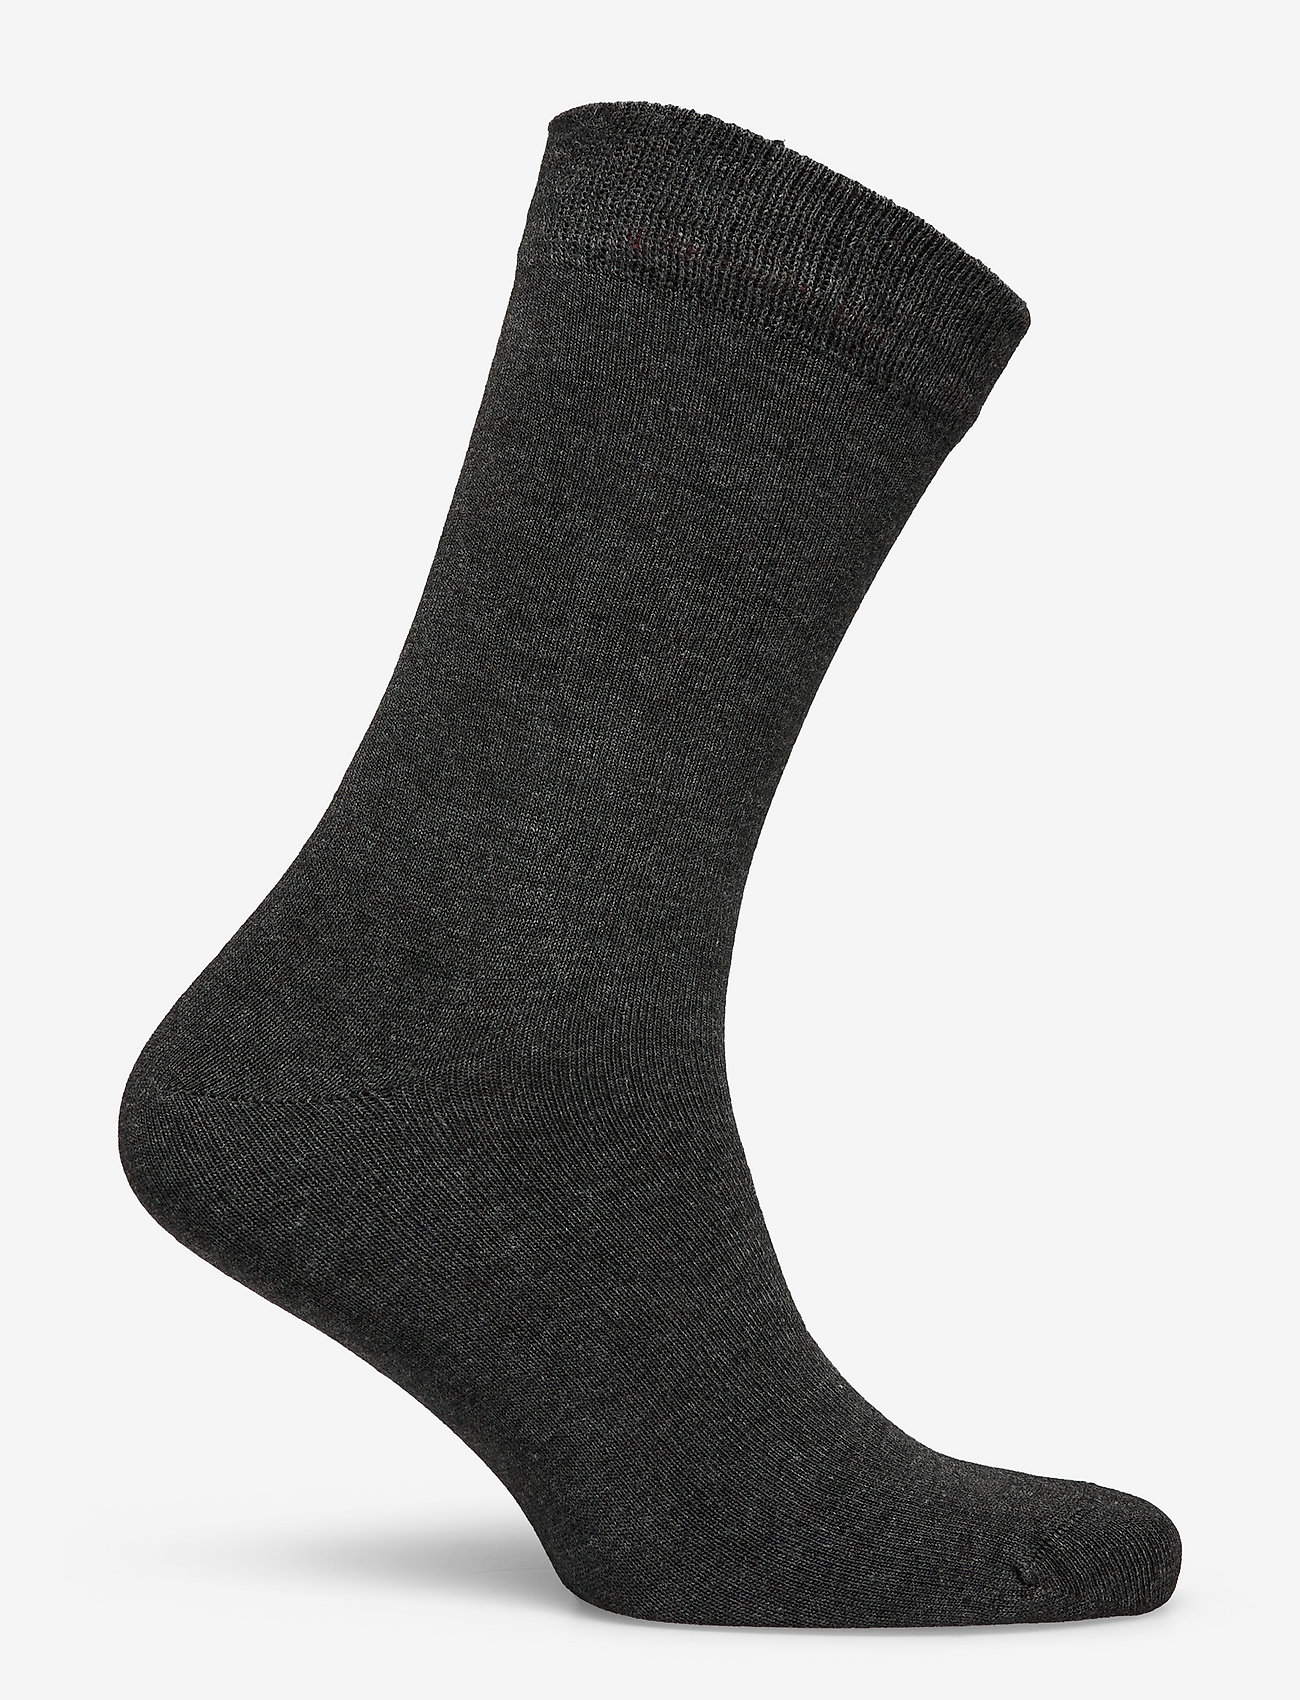 Lindbergh - Bamboo sock - lowest prices - charcoal mel - 1